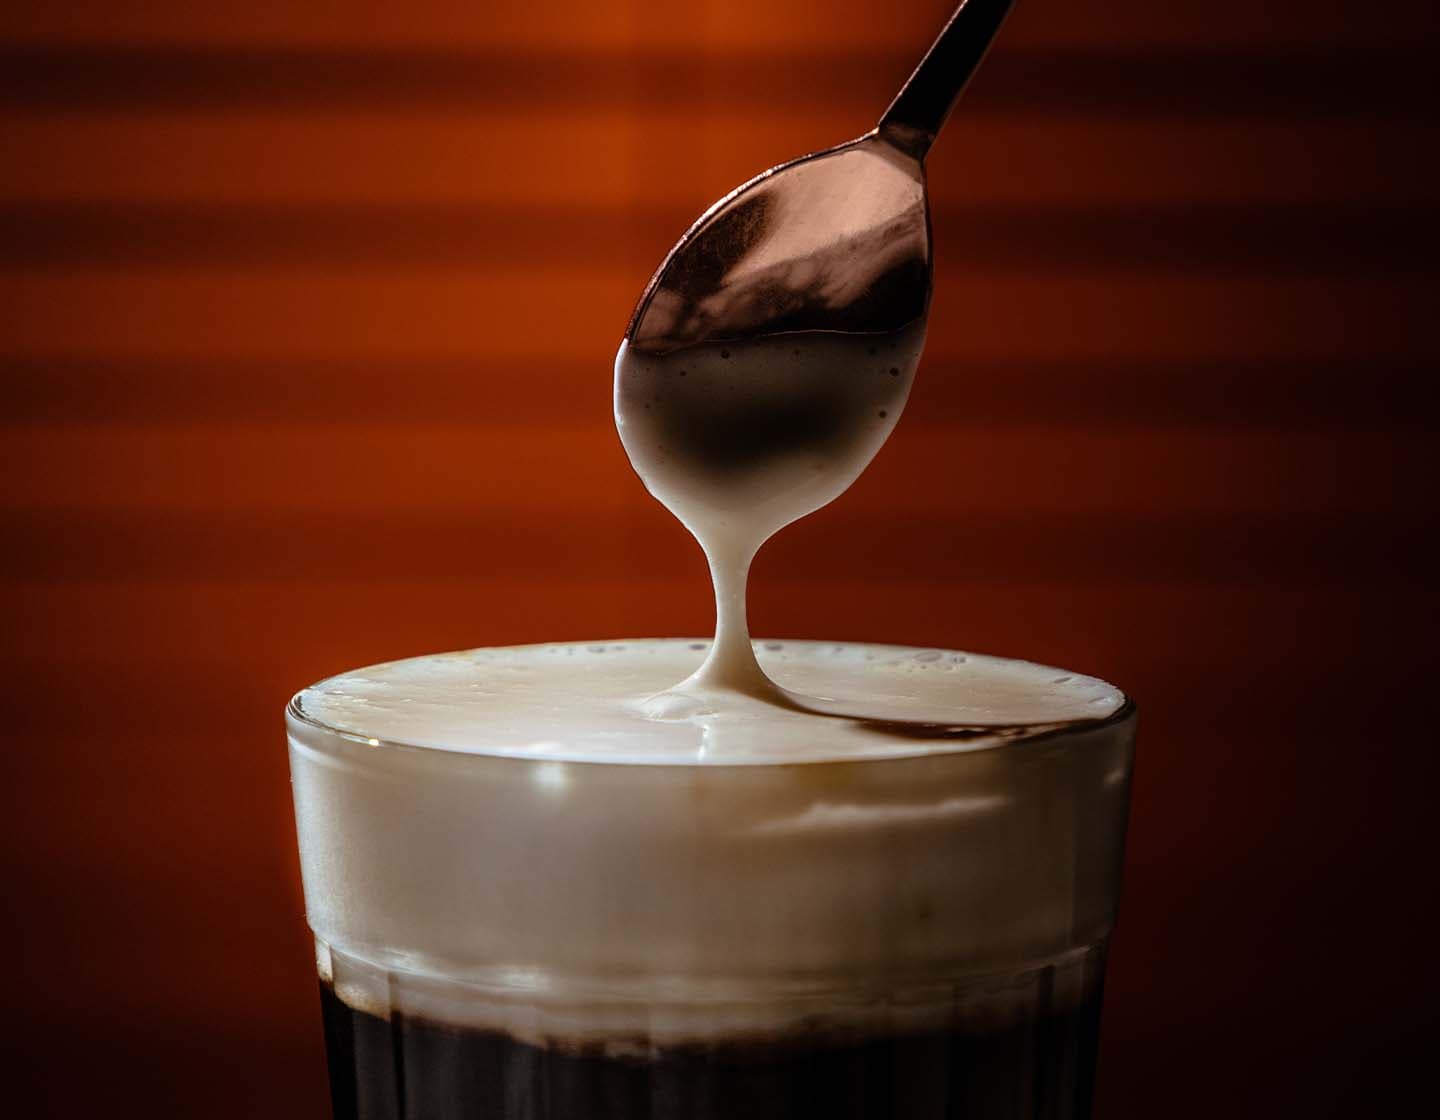 A close-up of a stirring spoon over the top of a drink with a thick layer of cream/foam on top. 